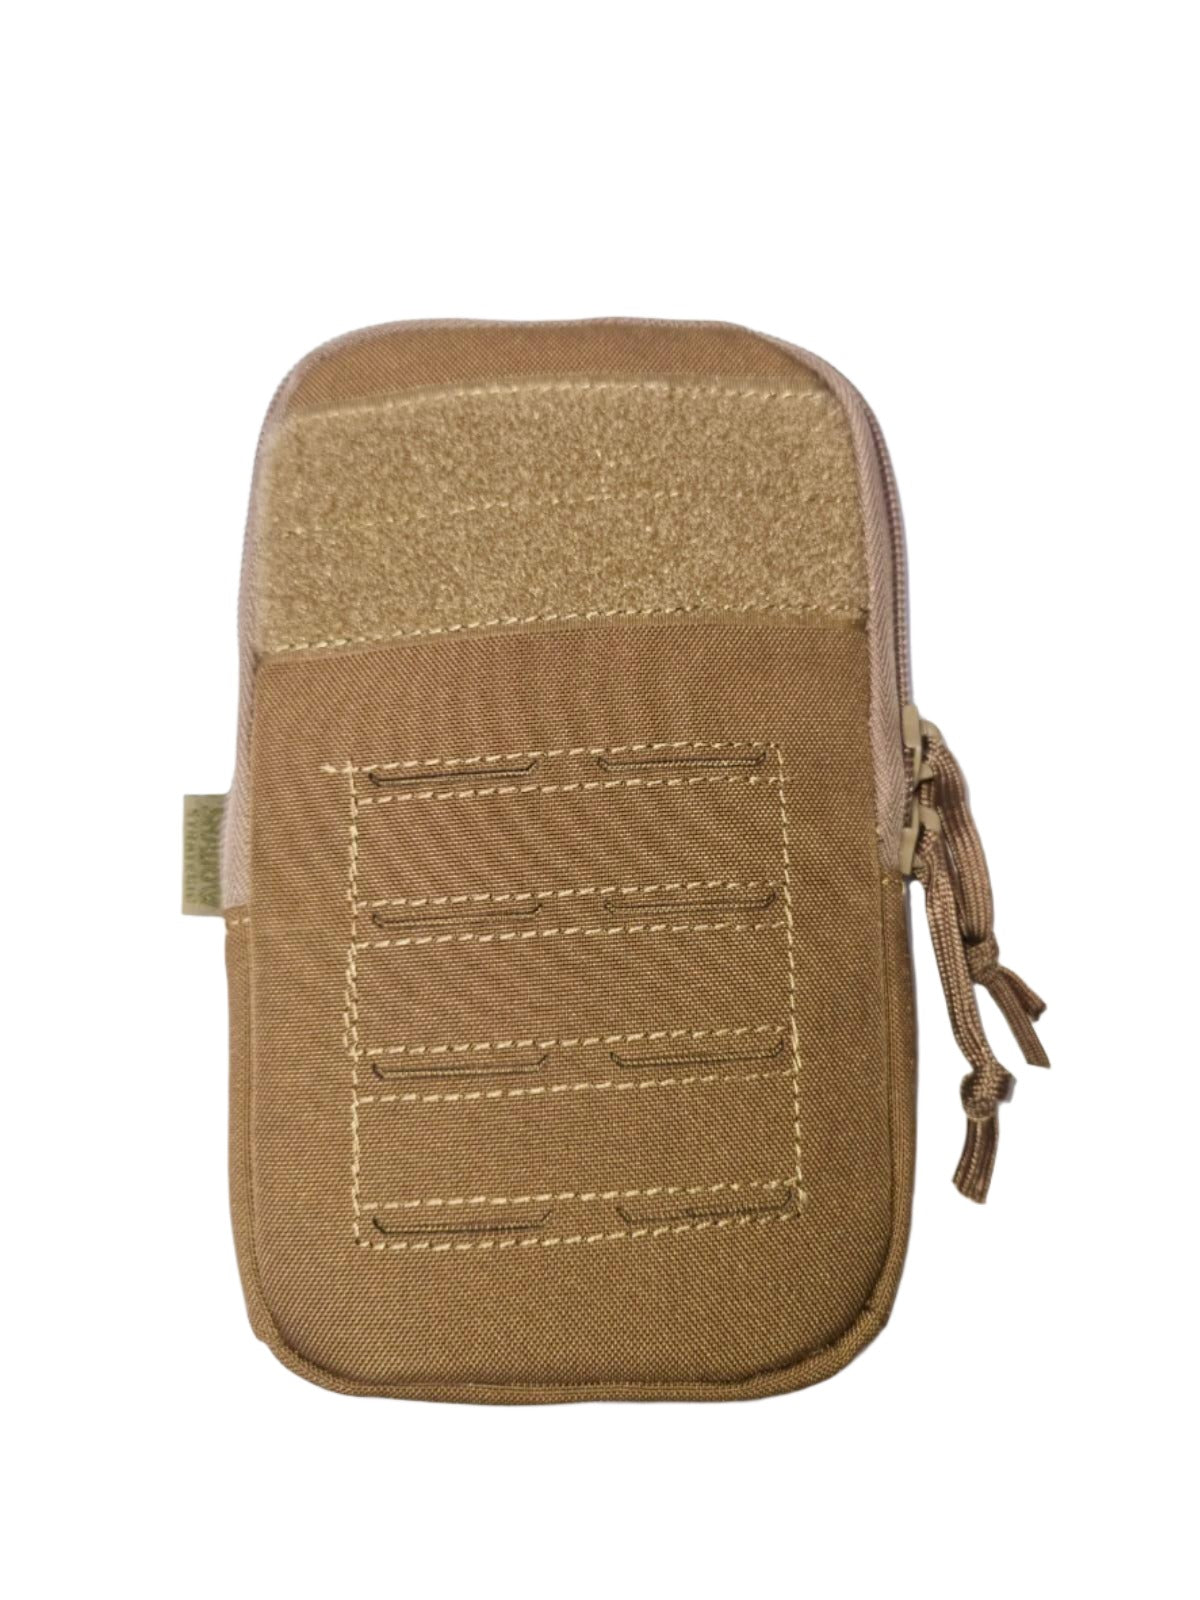 SHS-1038-Cell Phone Pouch with Molle loop-COYOTE 